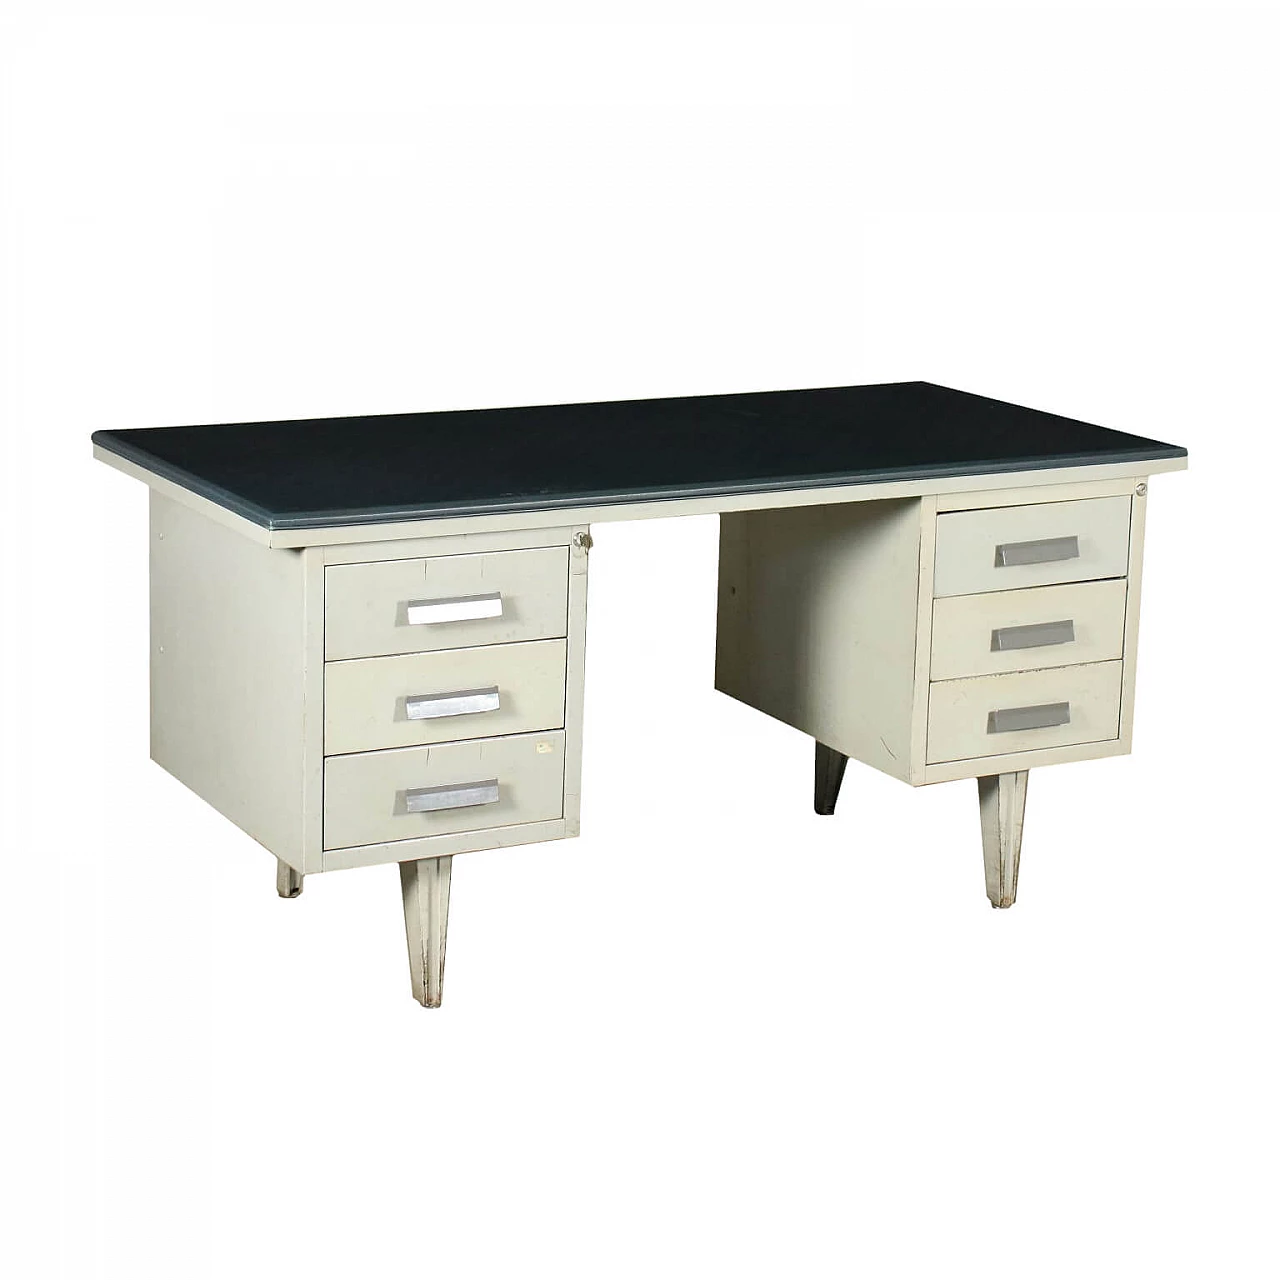 Desk with drawers in metal and leatherette top, 60s 1207989